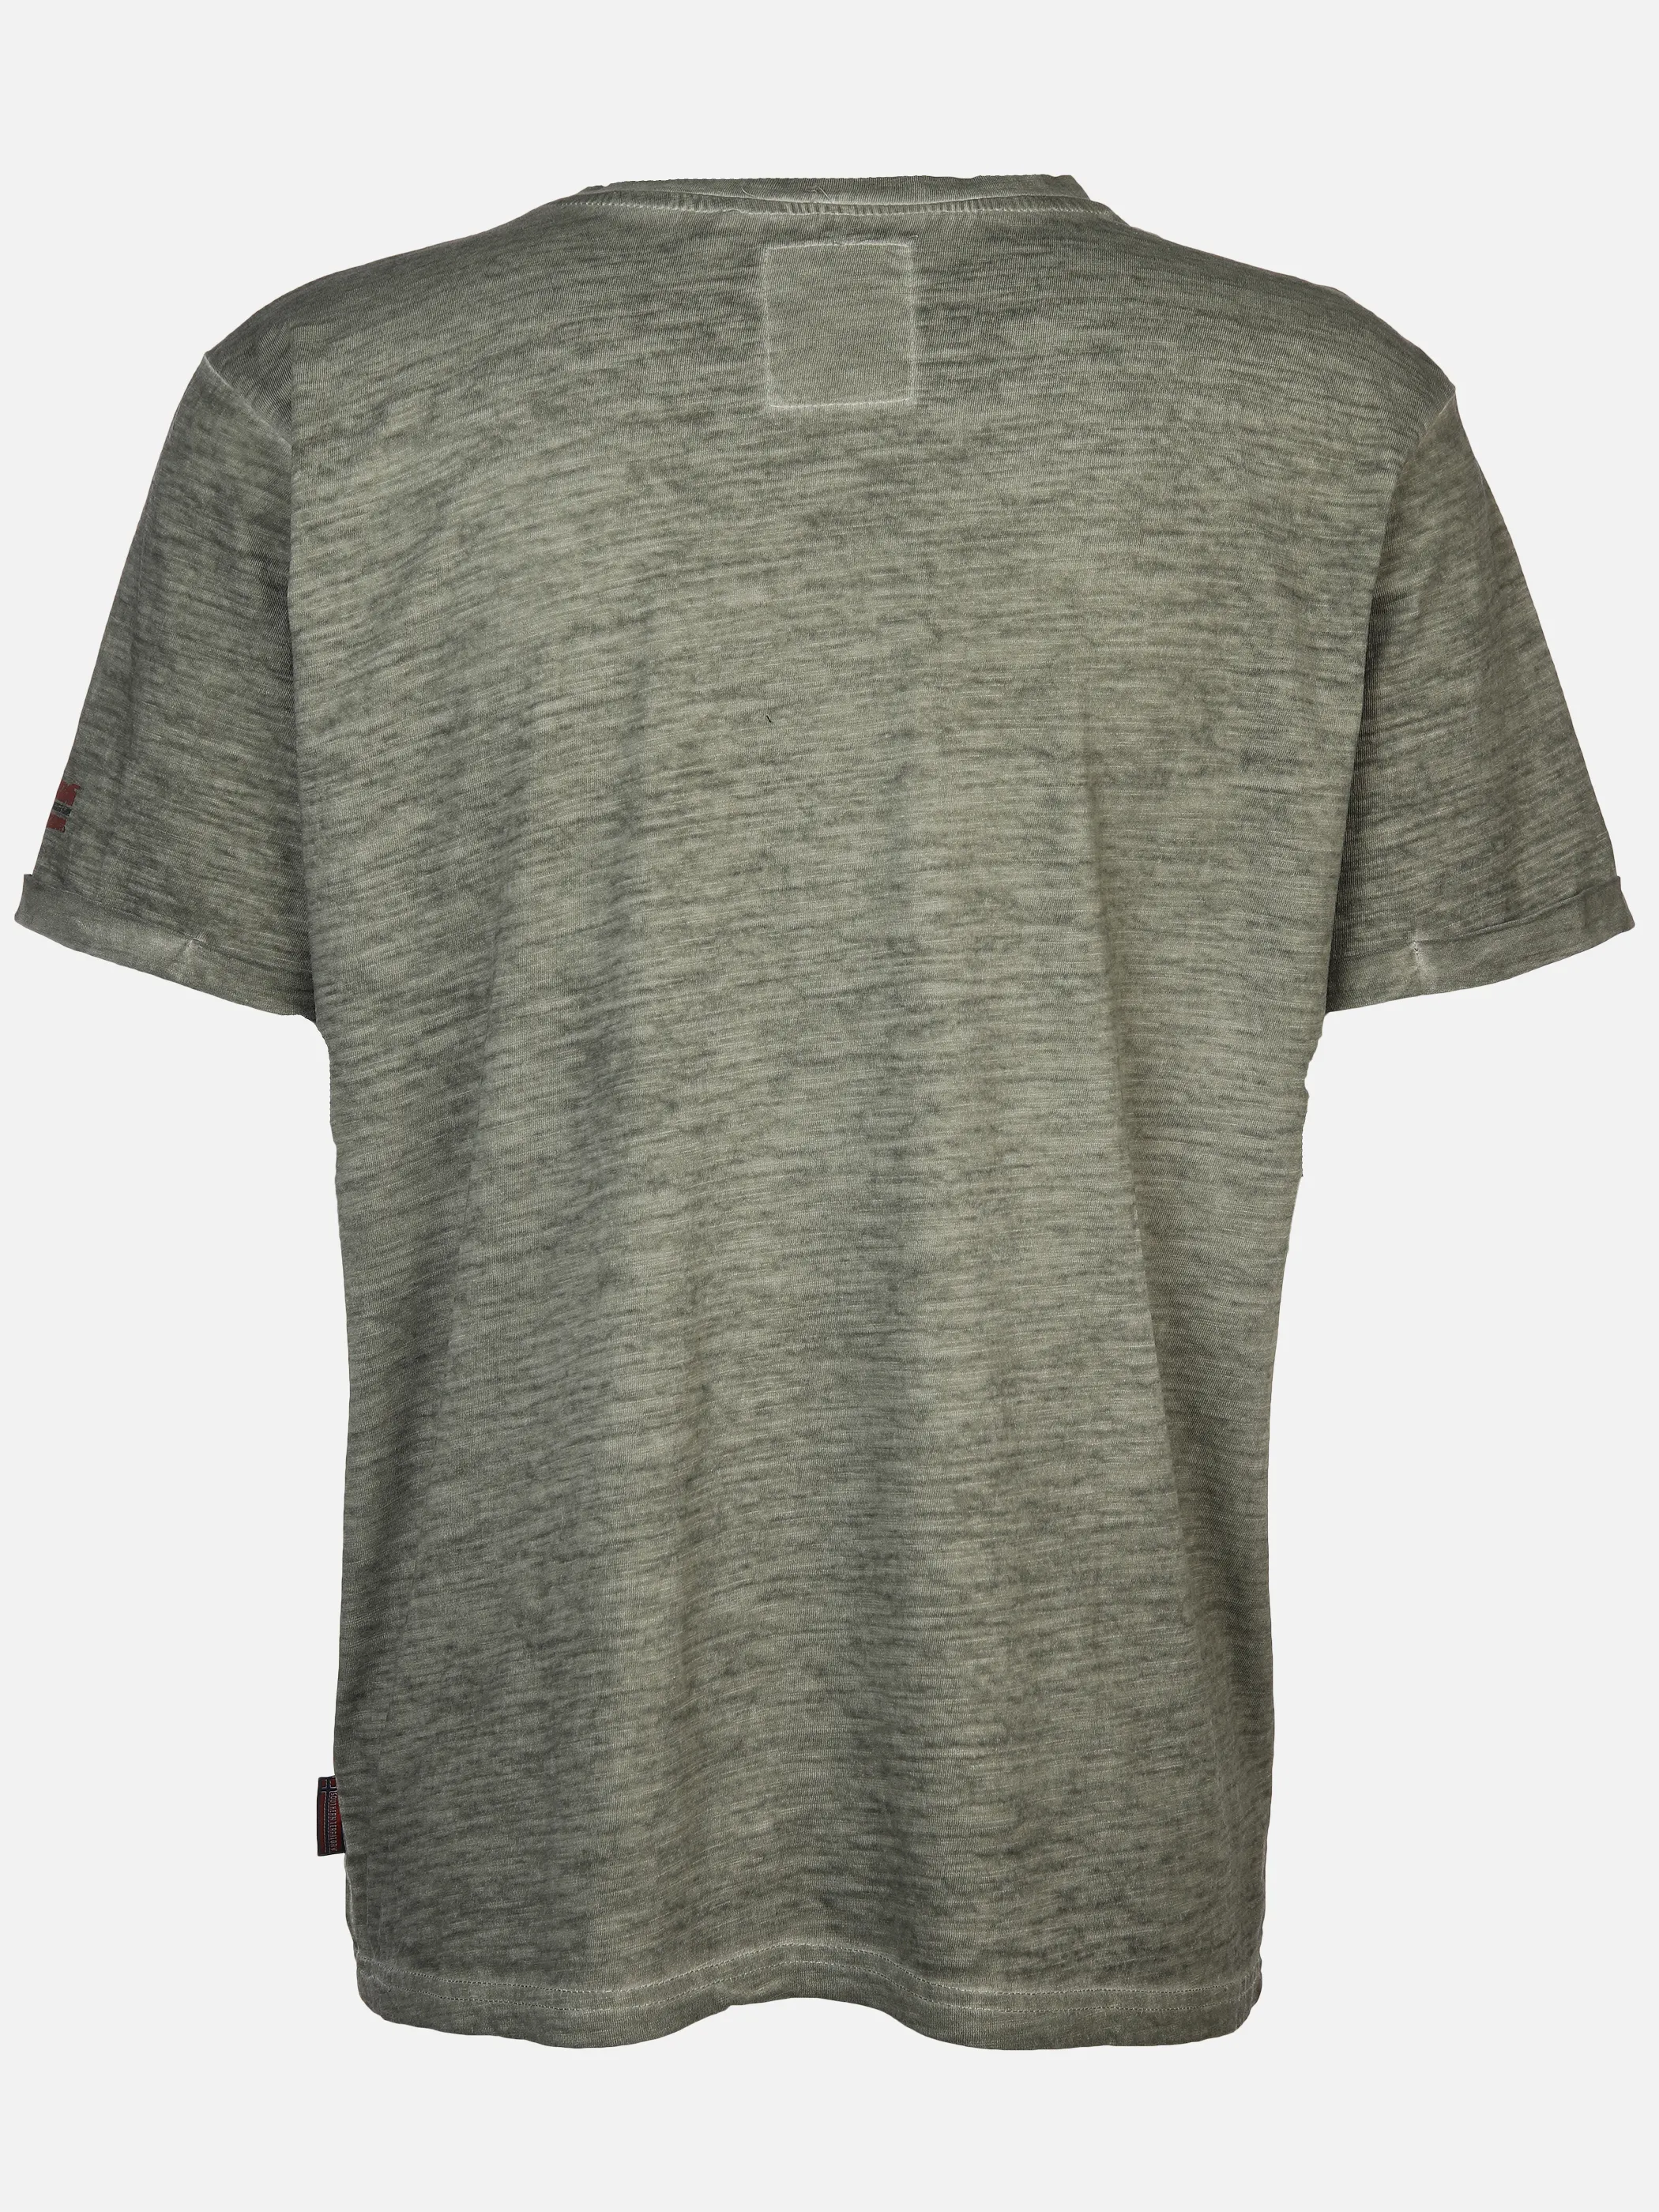 Southern Territory He. T-Shirt 1/2 Arm Logo Oliv 893166 OLIVE 2